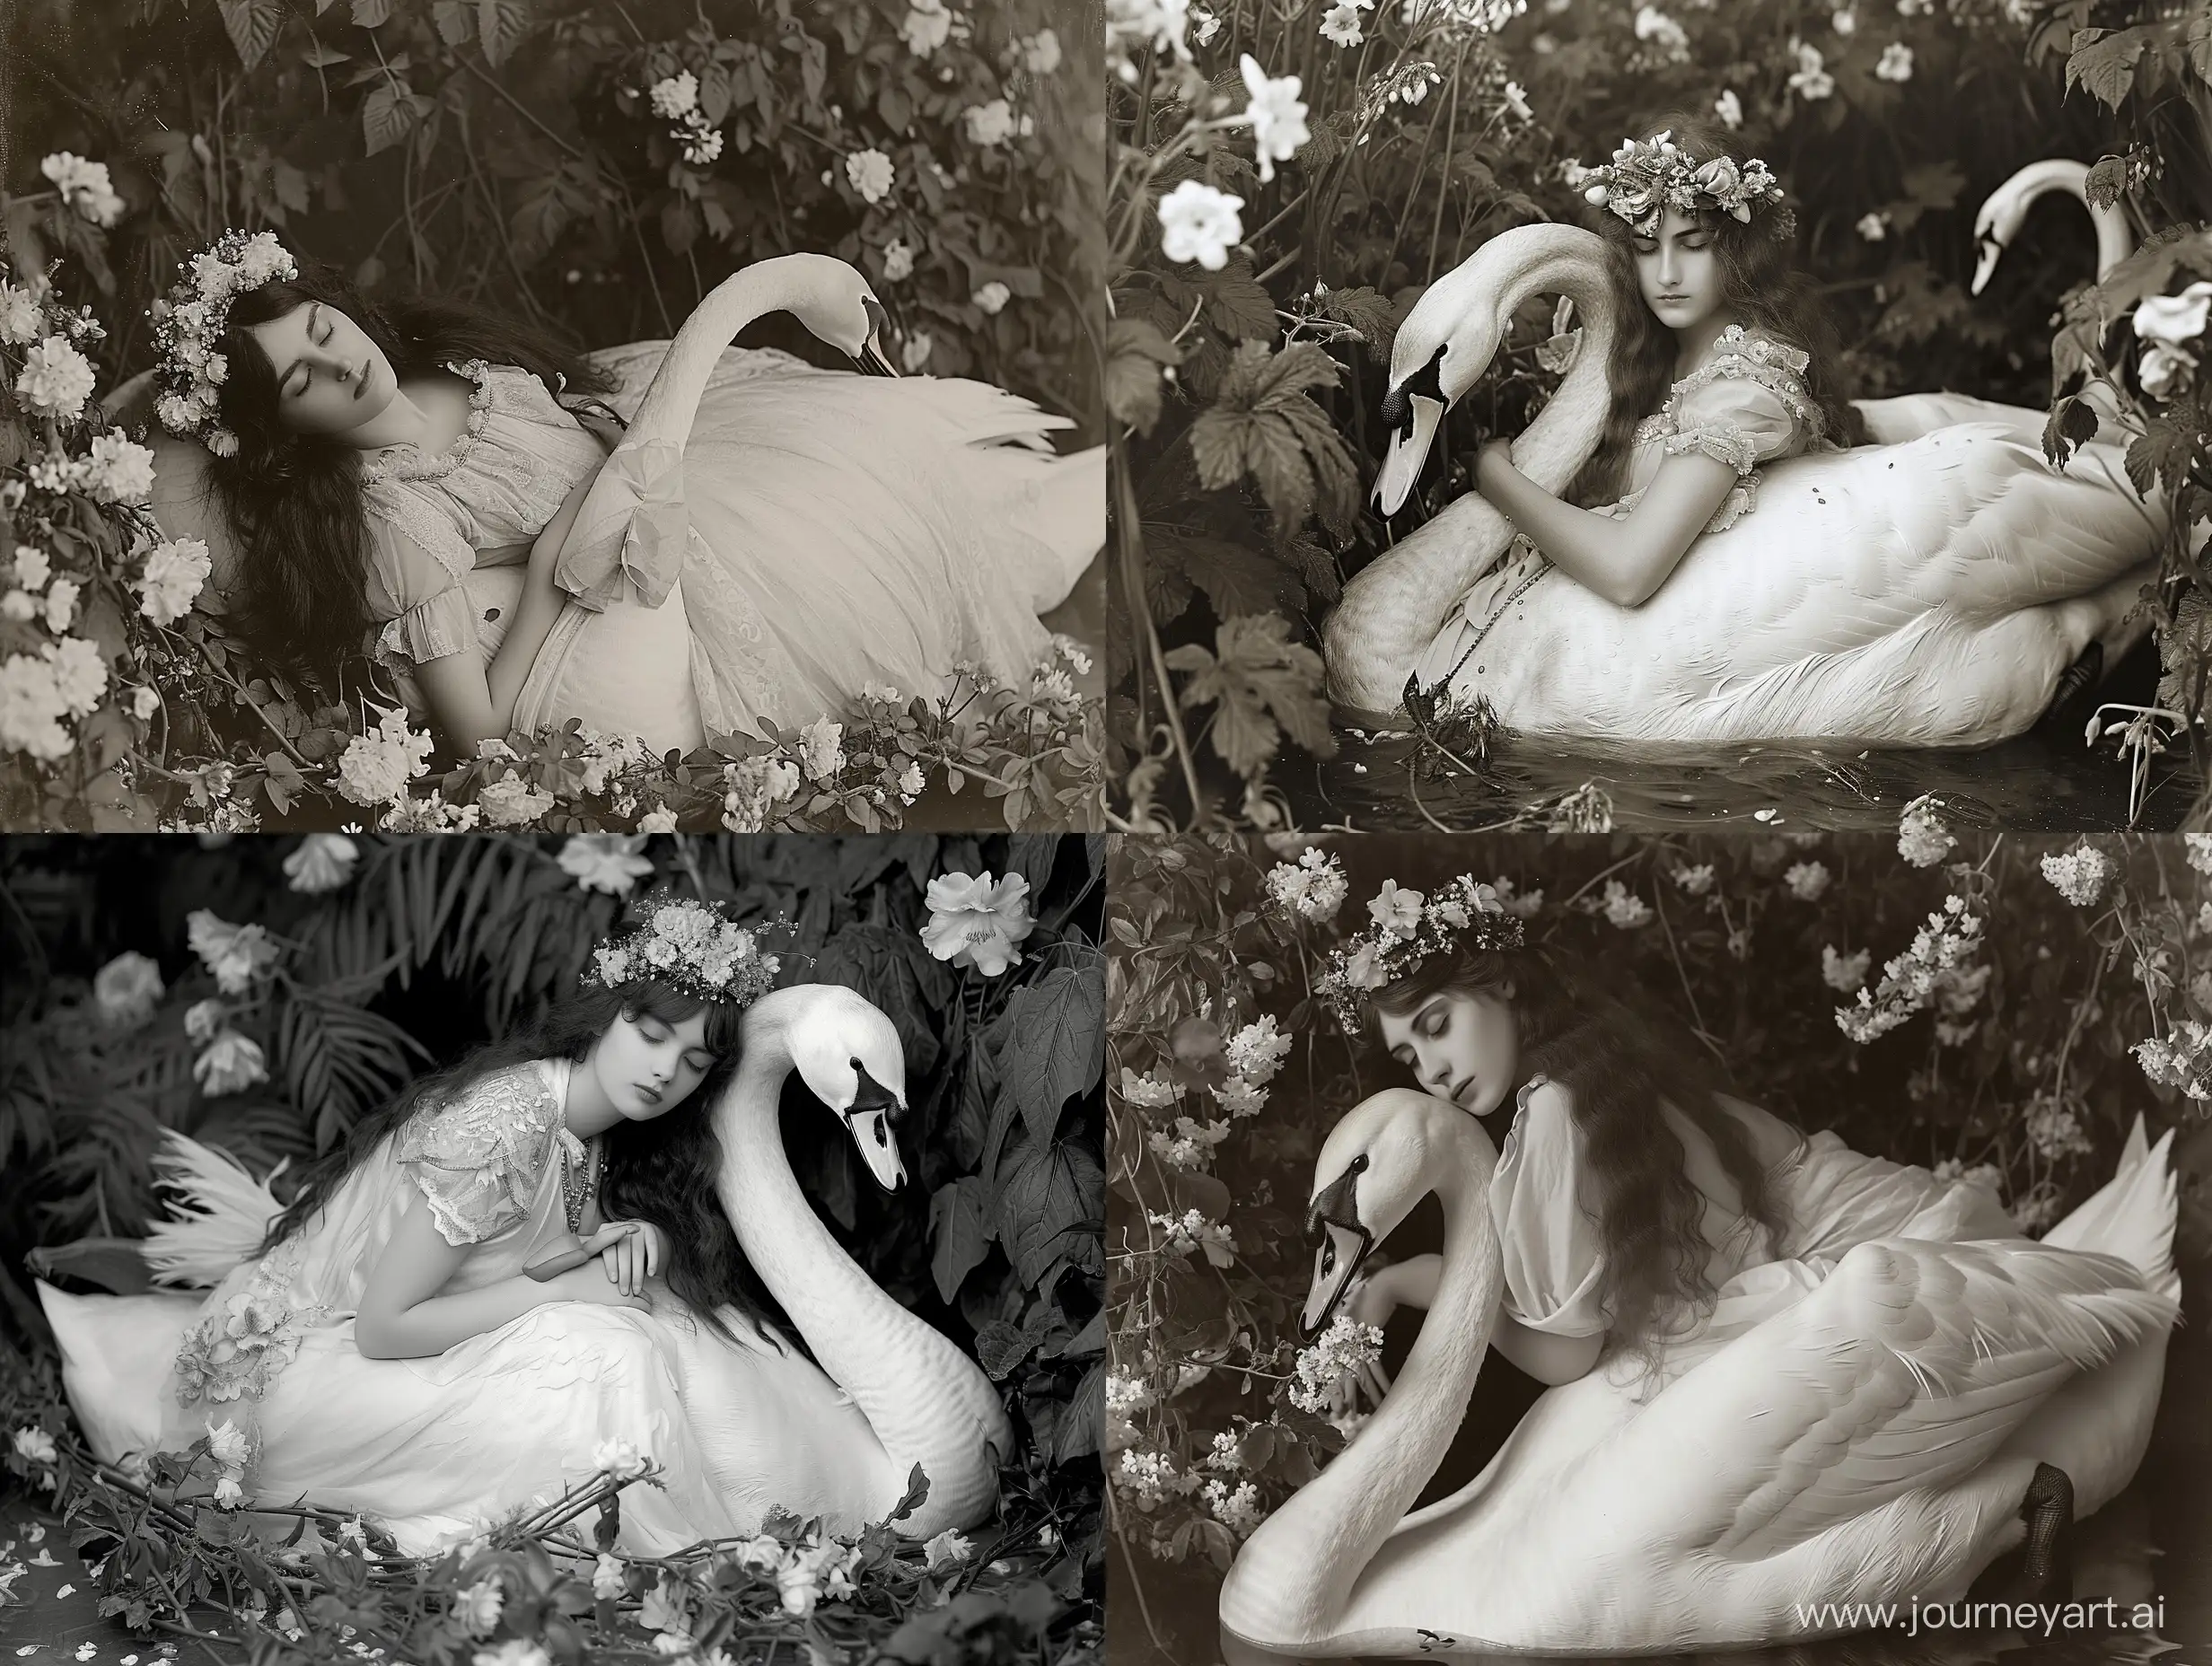 a young woman with long hair, lying and seemingly sleeping, leaning on a white swan. she is dressed in a white dress and decorated with an exquisite crown of flowers. the scene is surrounded by flowering plants. the atmosphere seems magical and fabulous